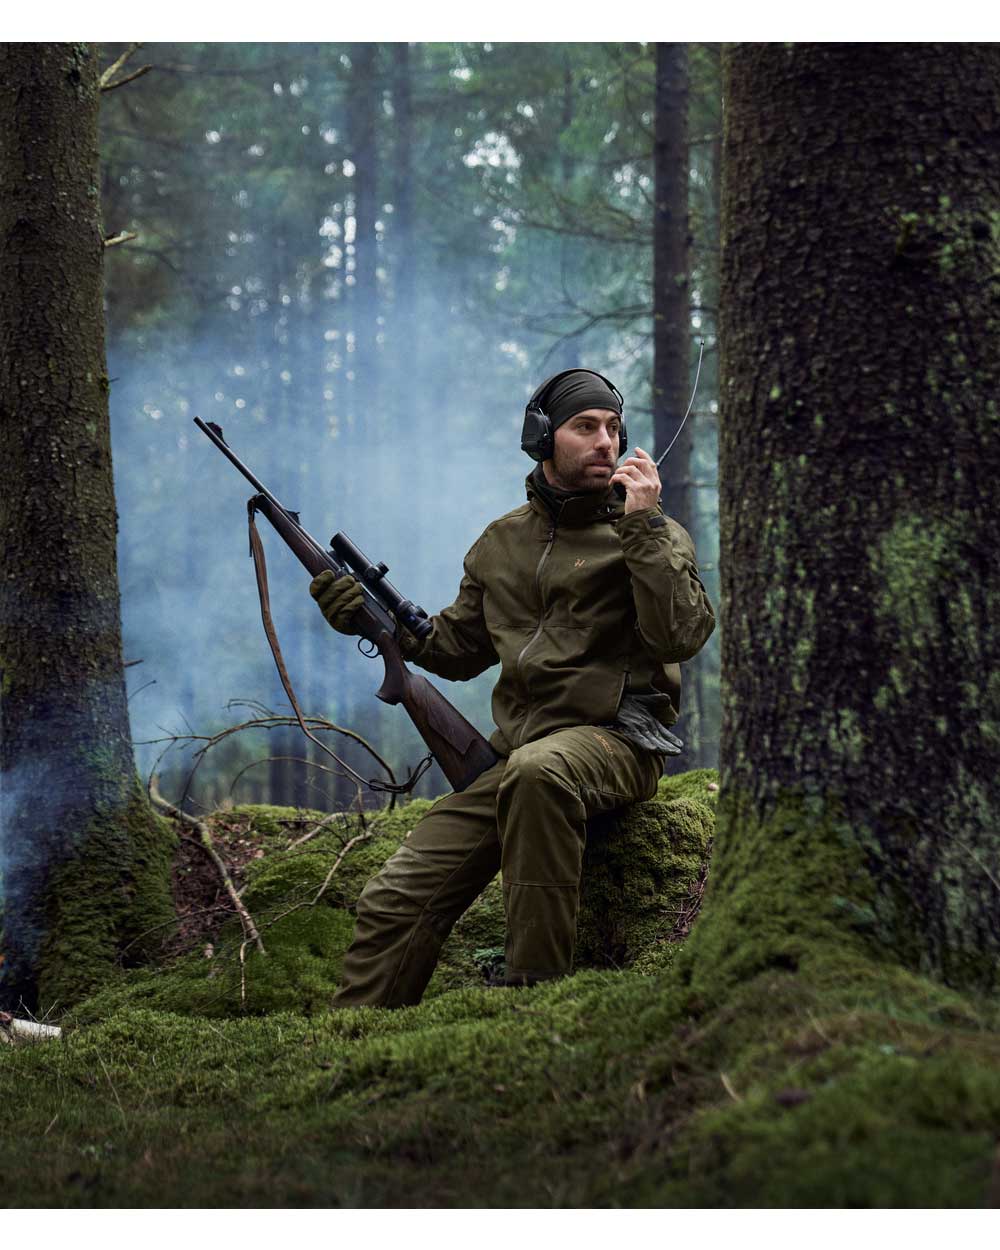 Radio connection Harkila Pro Hunter Move 2.0 GTX Jacket is the ultimate jacket for the hunting